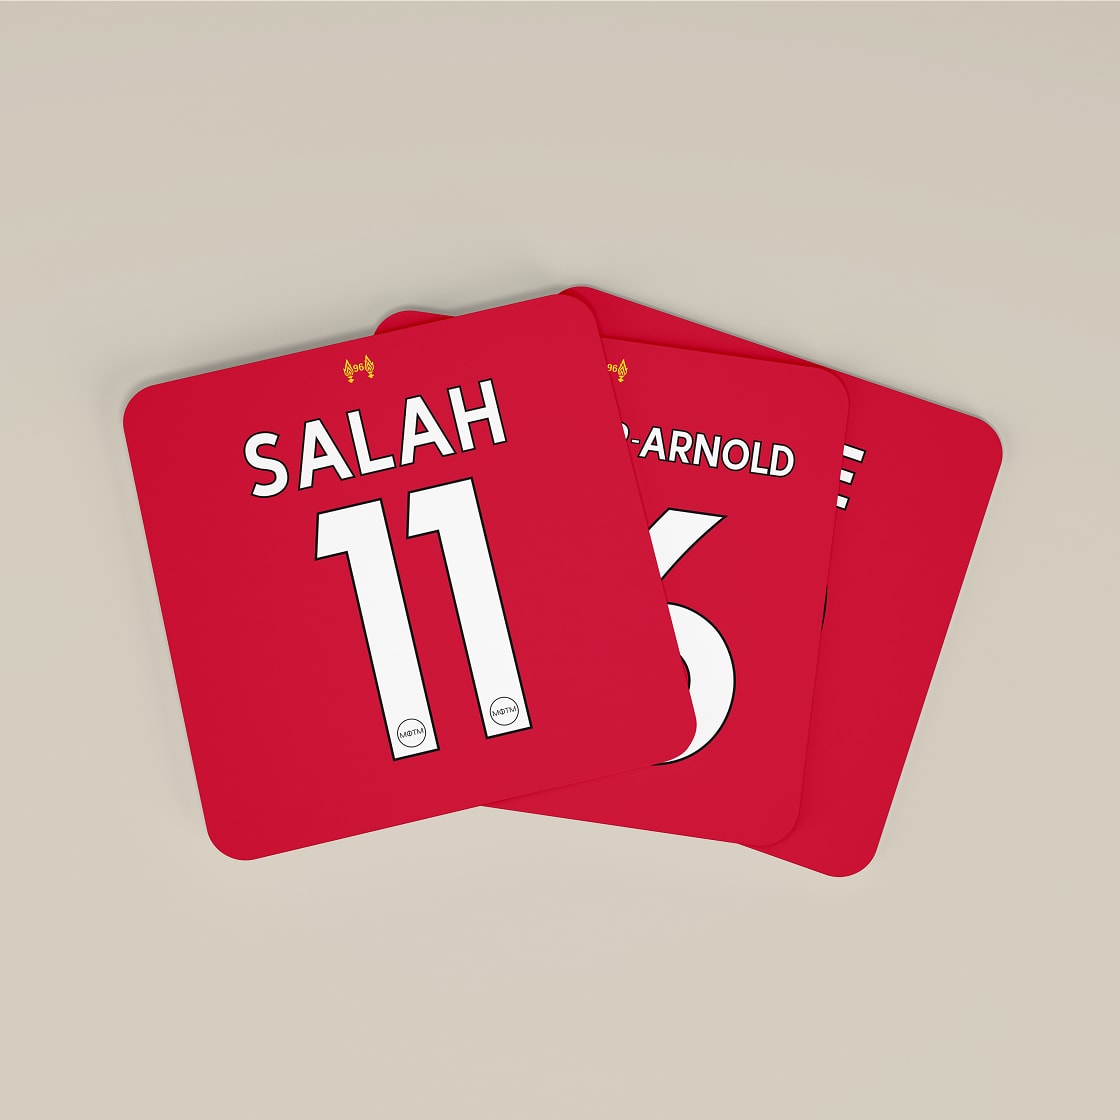 Liverpool 2020 Premier League Champions Football Coasters - Set of 4 - Man of The Match Football